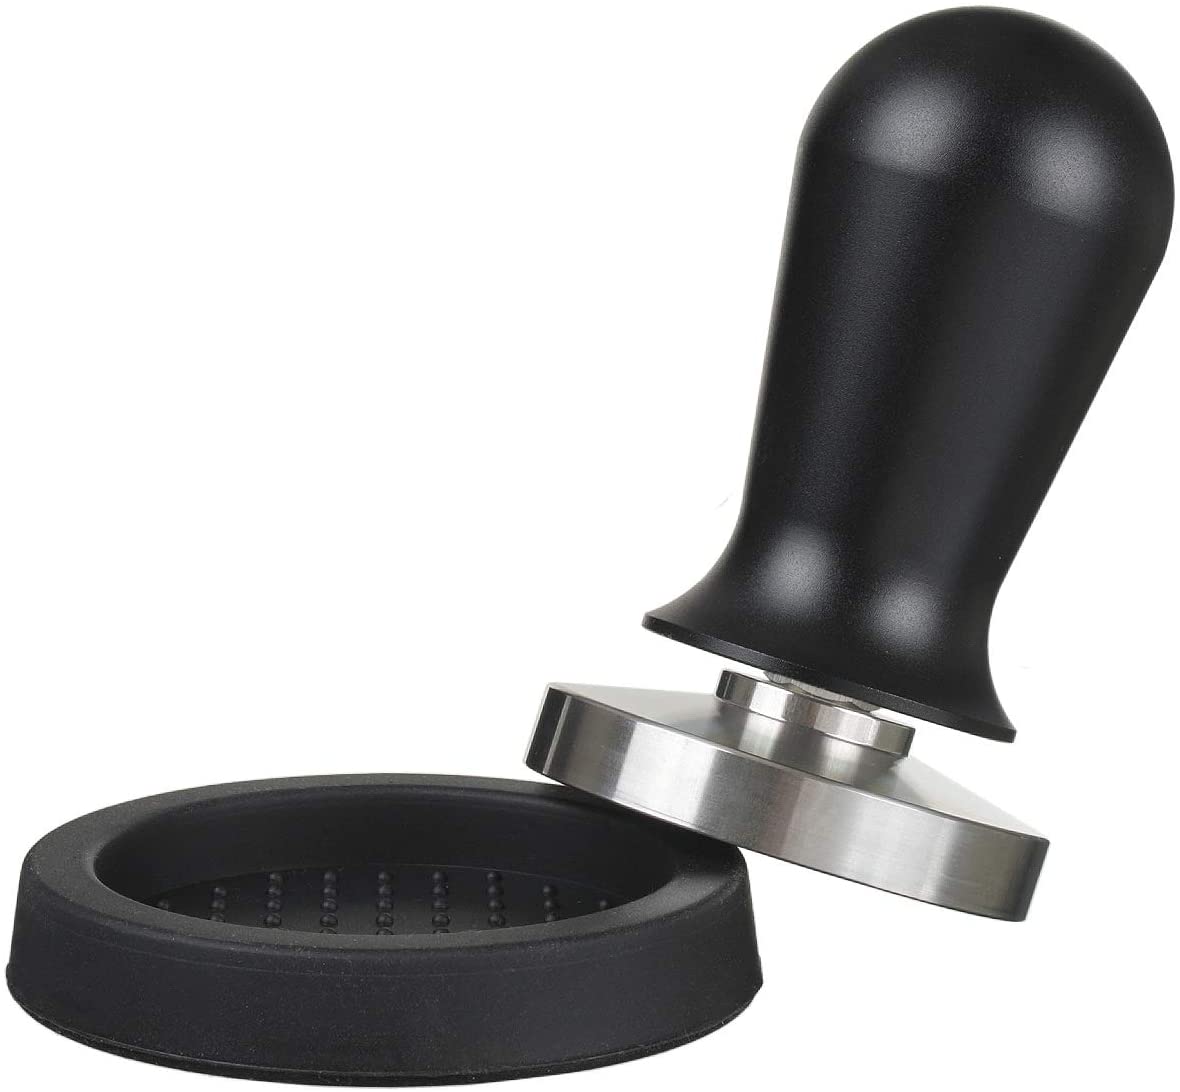 scarlet bijoux Scarlet Espresso | Tamper \"Perfetto\" for Barista; Calibrated to 35 lbs Contact Pressure; with Aluminium or Precious Wood Handle and Precision Stainless Steel Base (Set 51 mm & Tamper Tray)